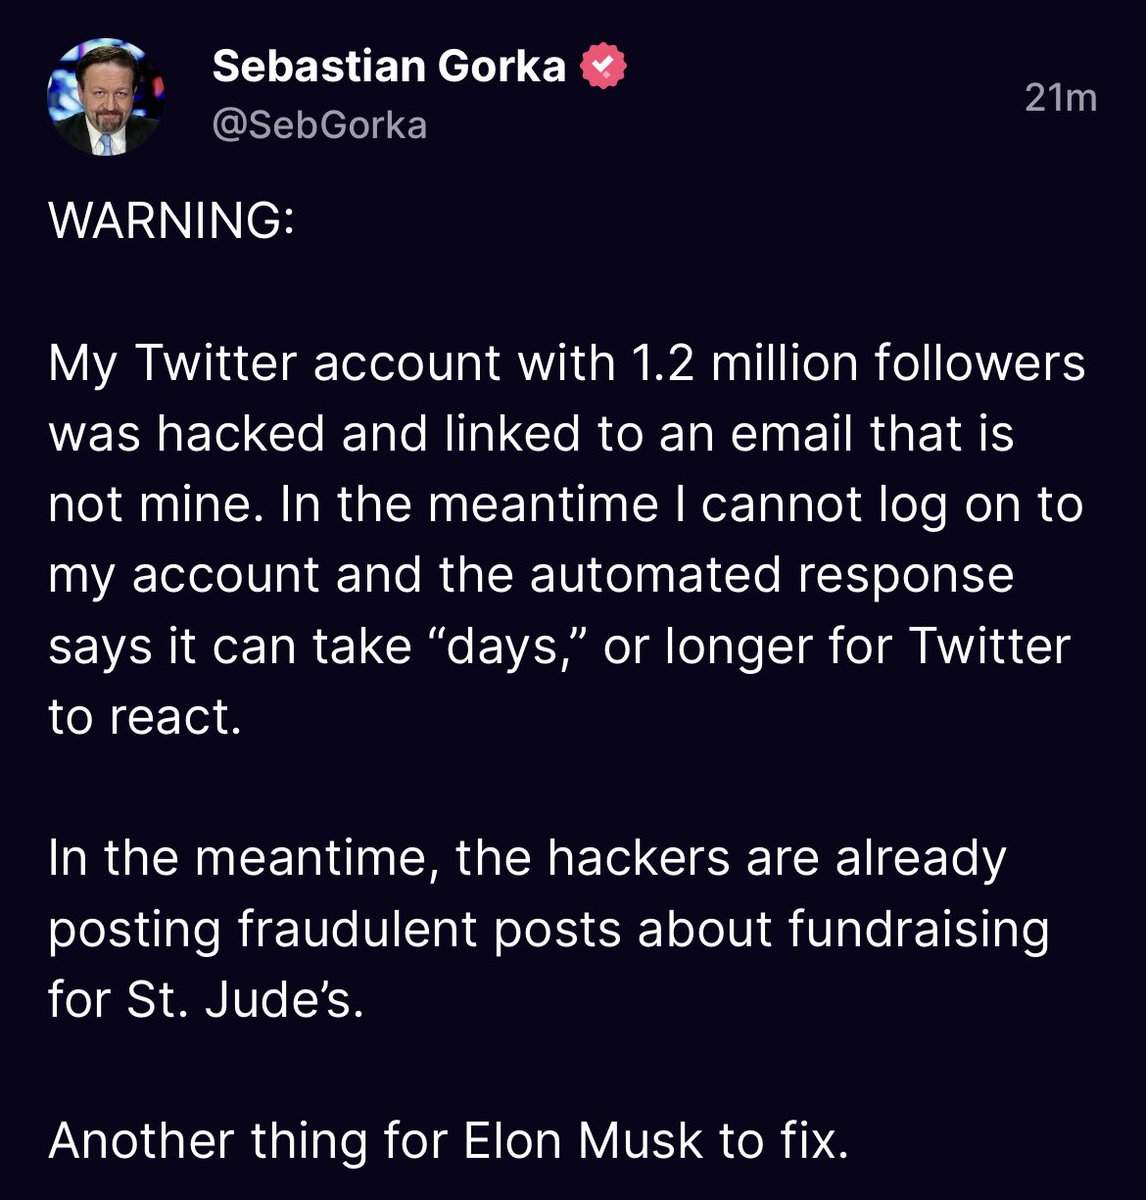 RT @RonFilipkowski: Someone hacked Seb Gorka’s account and is now using it to sell PlayStation 5s to his followers. https://t.co/cPnyqtAXzh